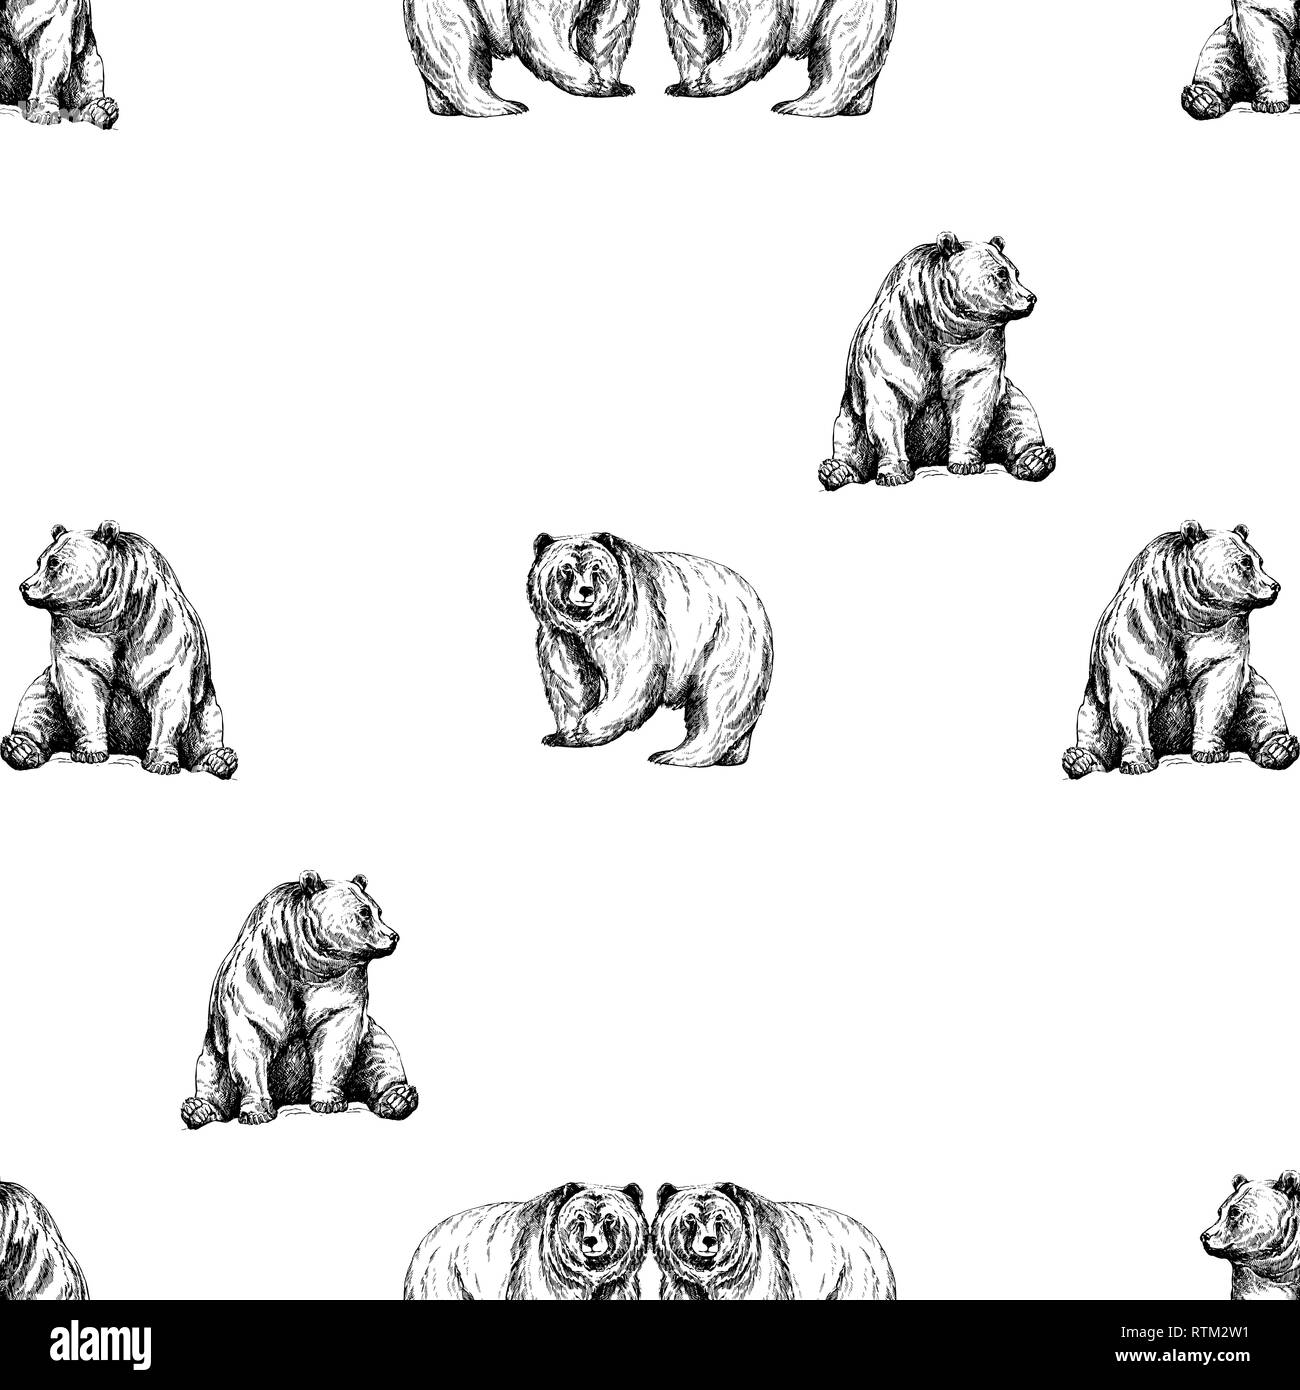 Seamless pattern of hand drawn sketch style bears isolated on white background. Vector illustration. Stock Vector